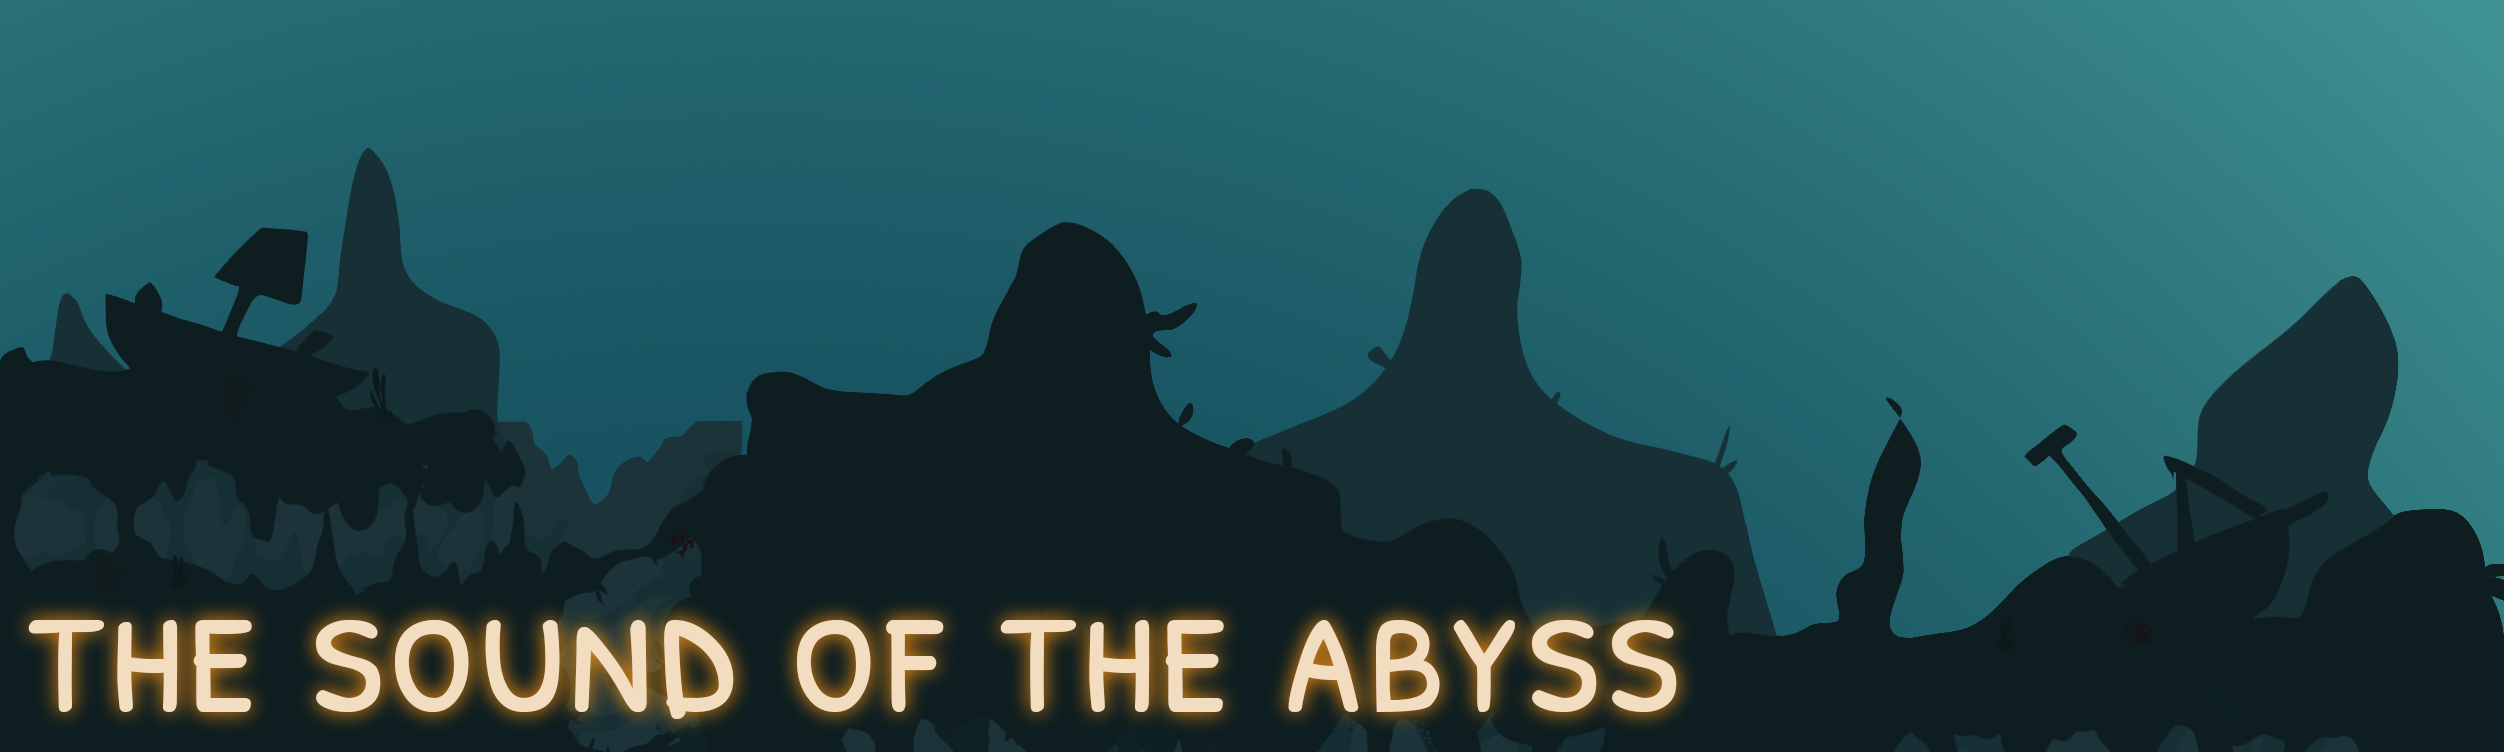 The sound of the abyss